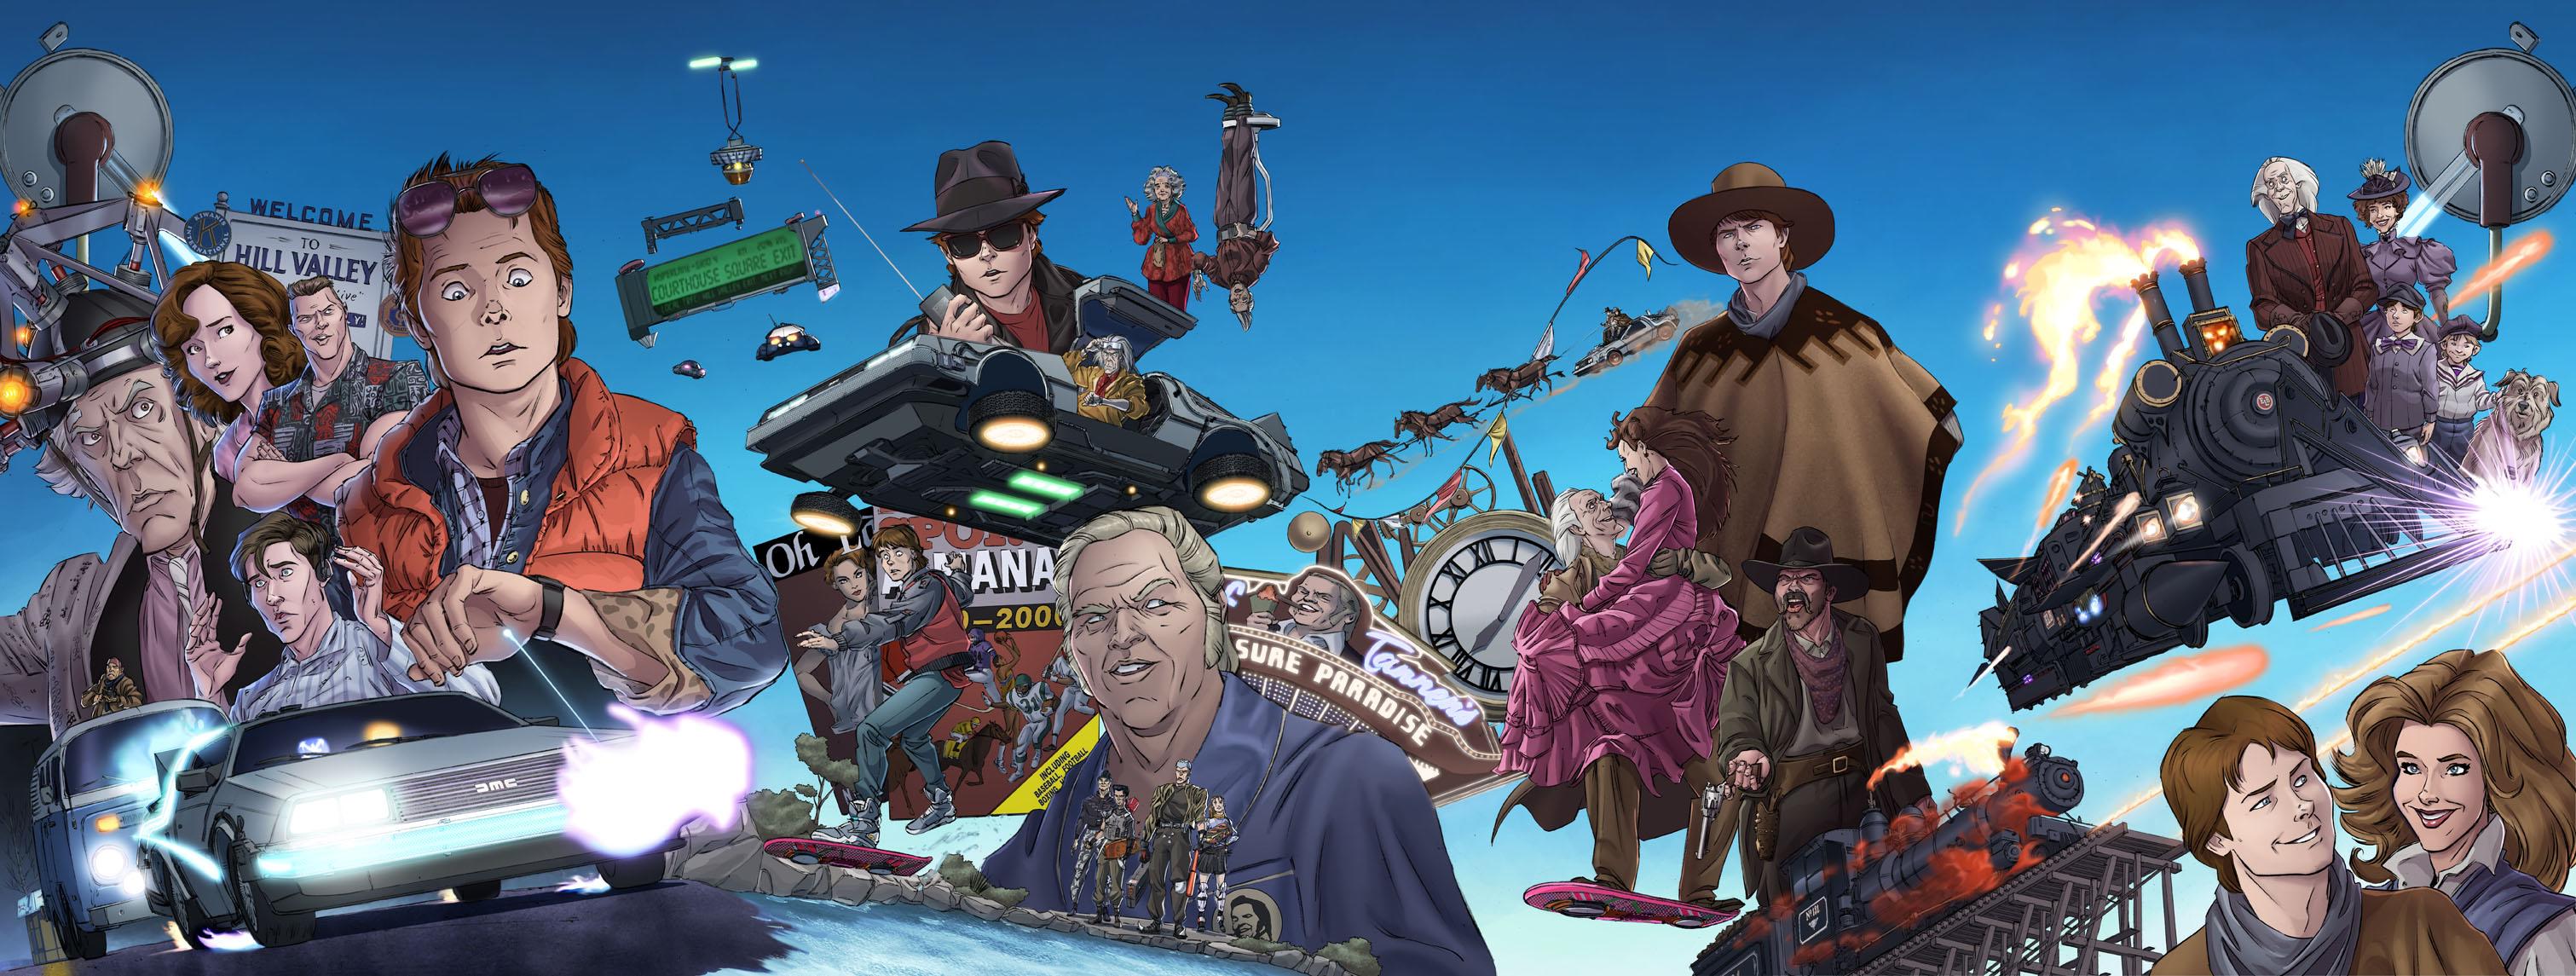 Please Leave A Comment Or Rate This Image - Back To The Future Comic Cover , HD Wallpaper & Backgrounds